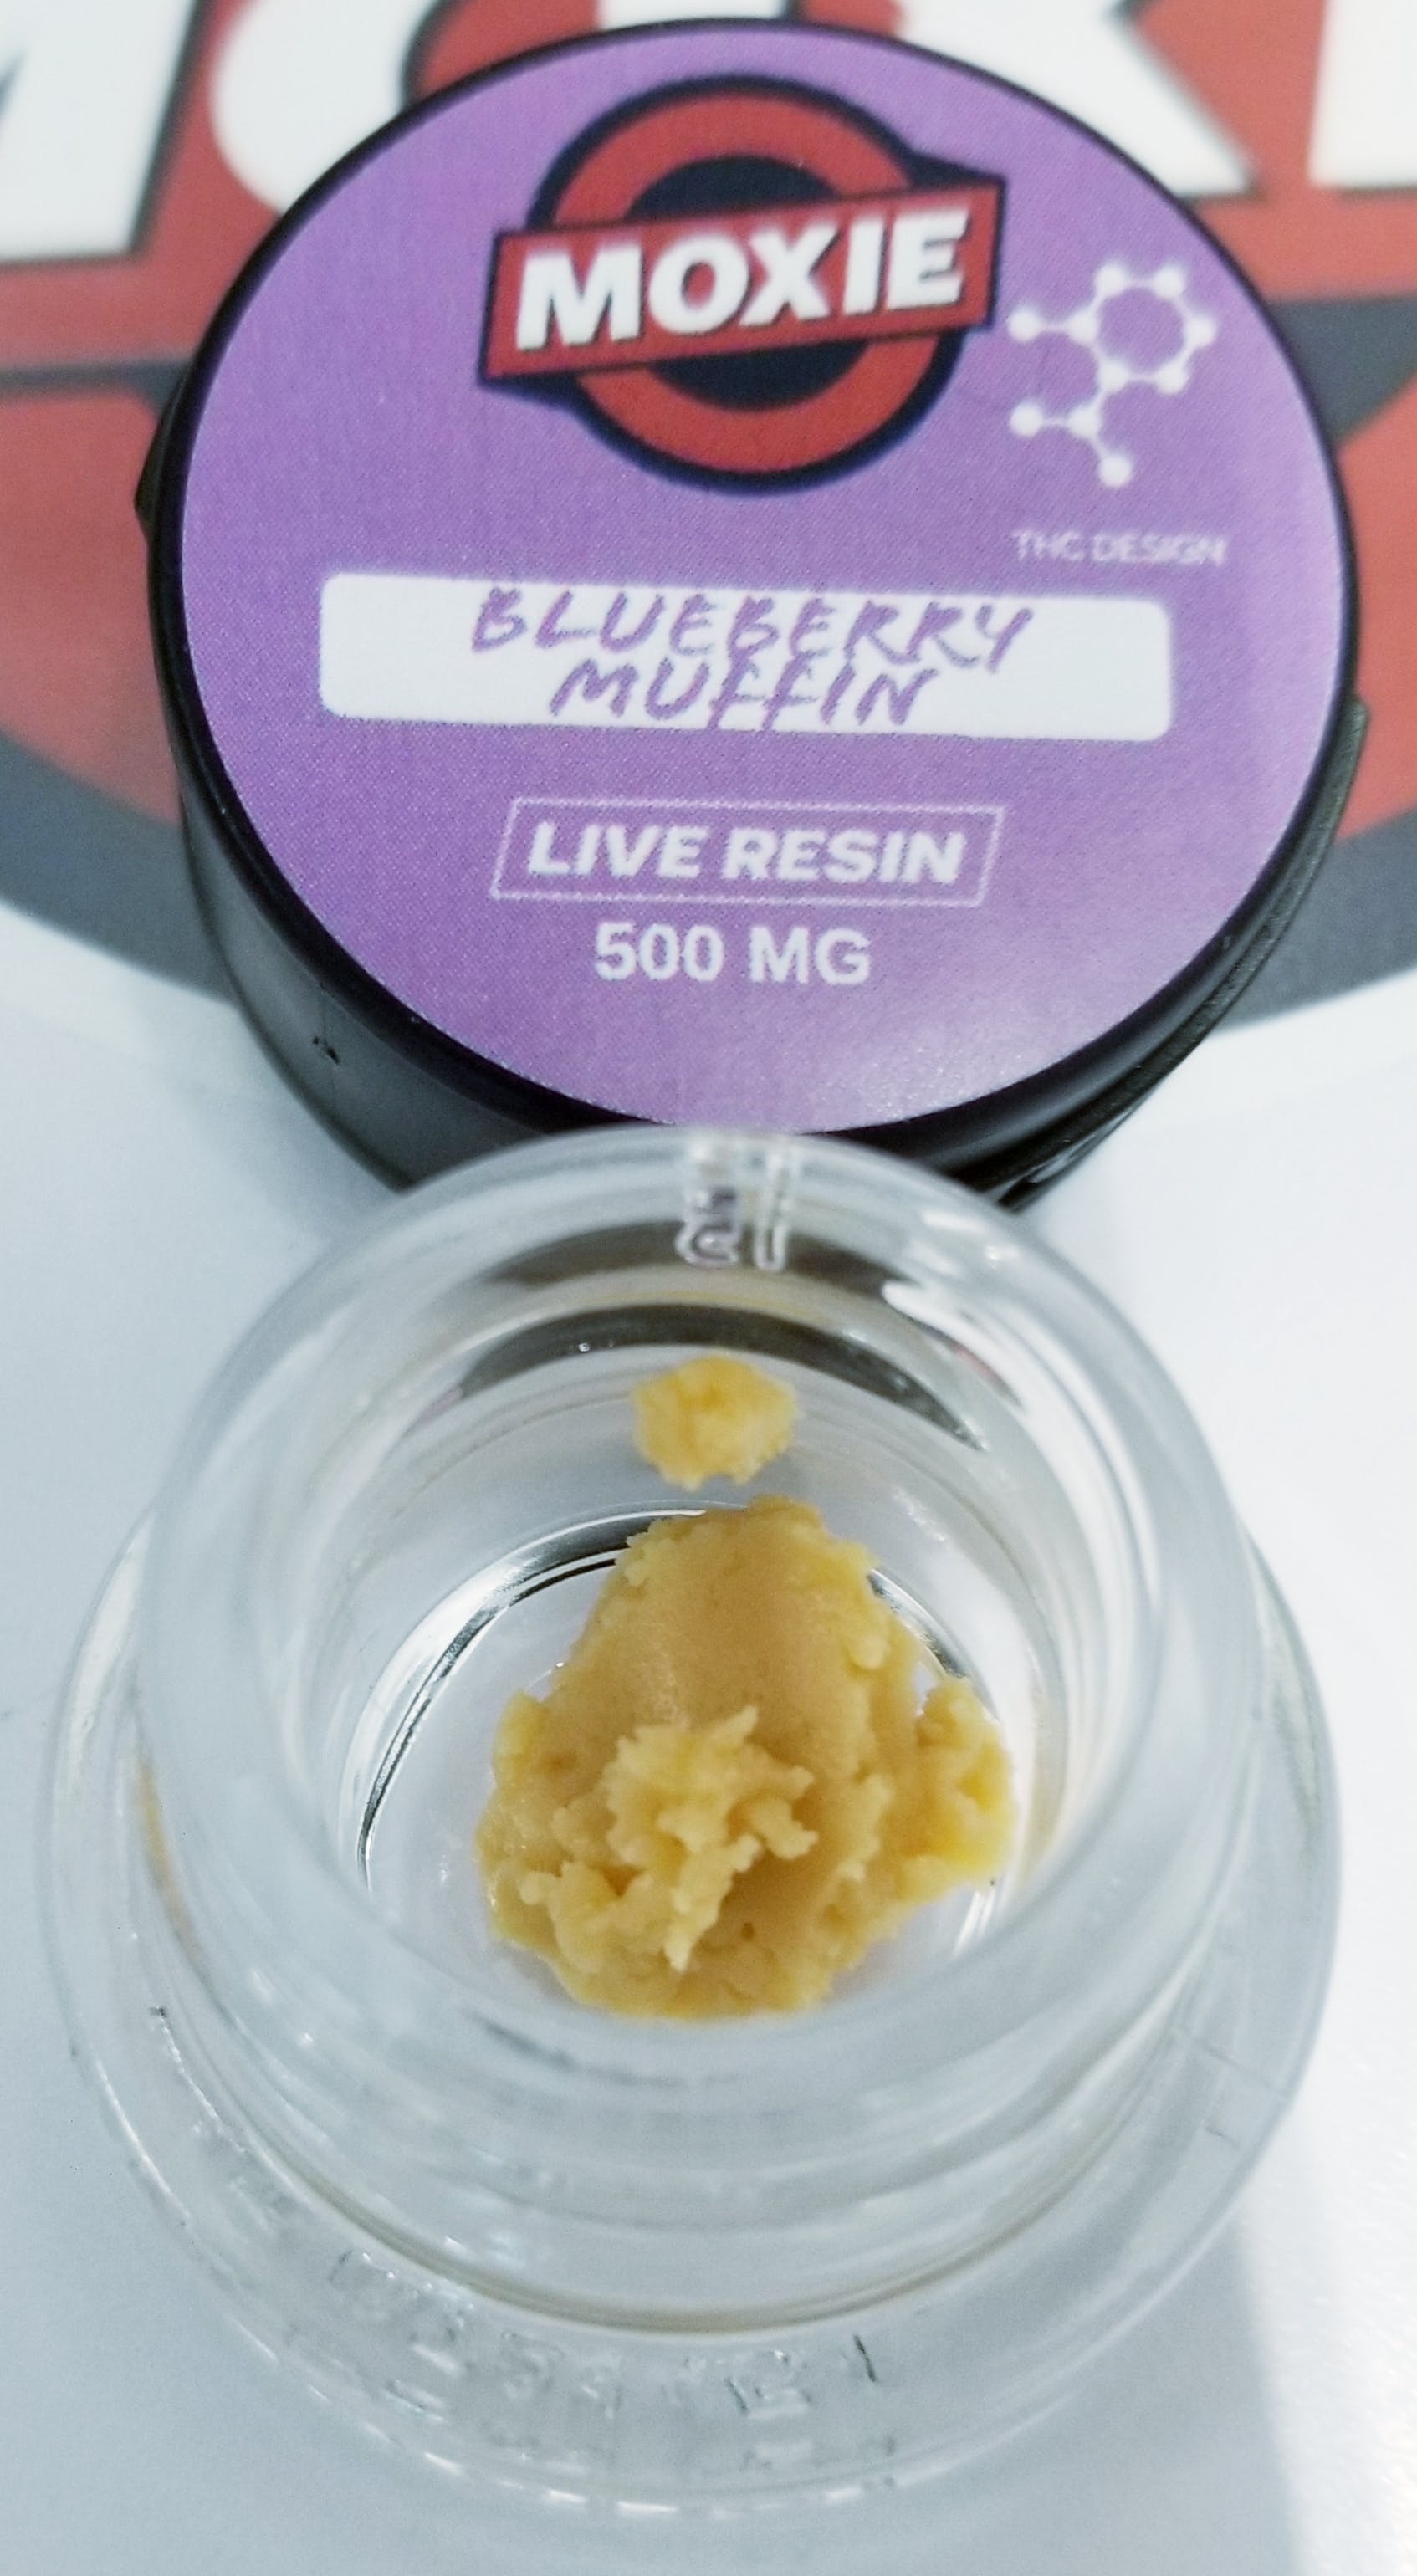 marijuana-dispensaries-city-compassionate-caregivers-ccc-in-los-angeles-blueberry-muffin-live-resin-badder